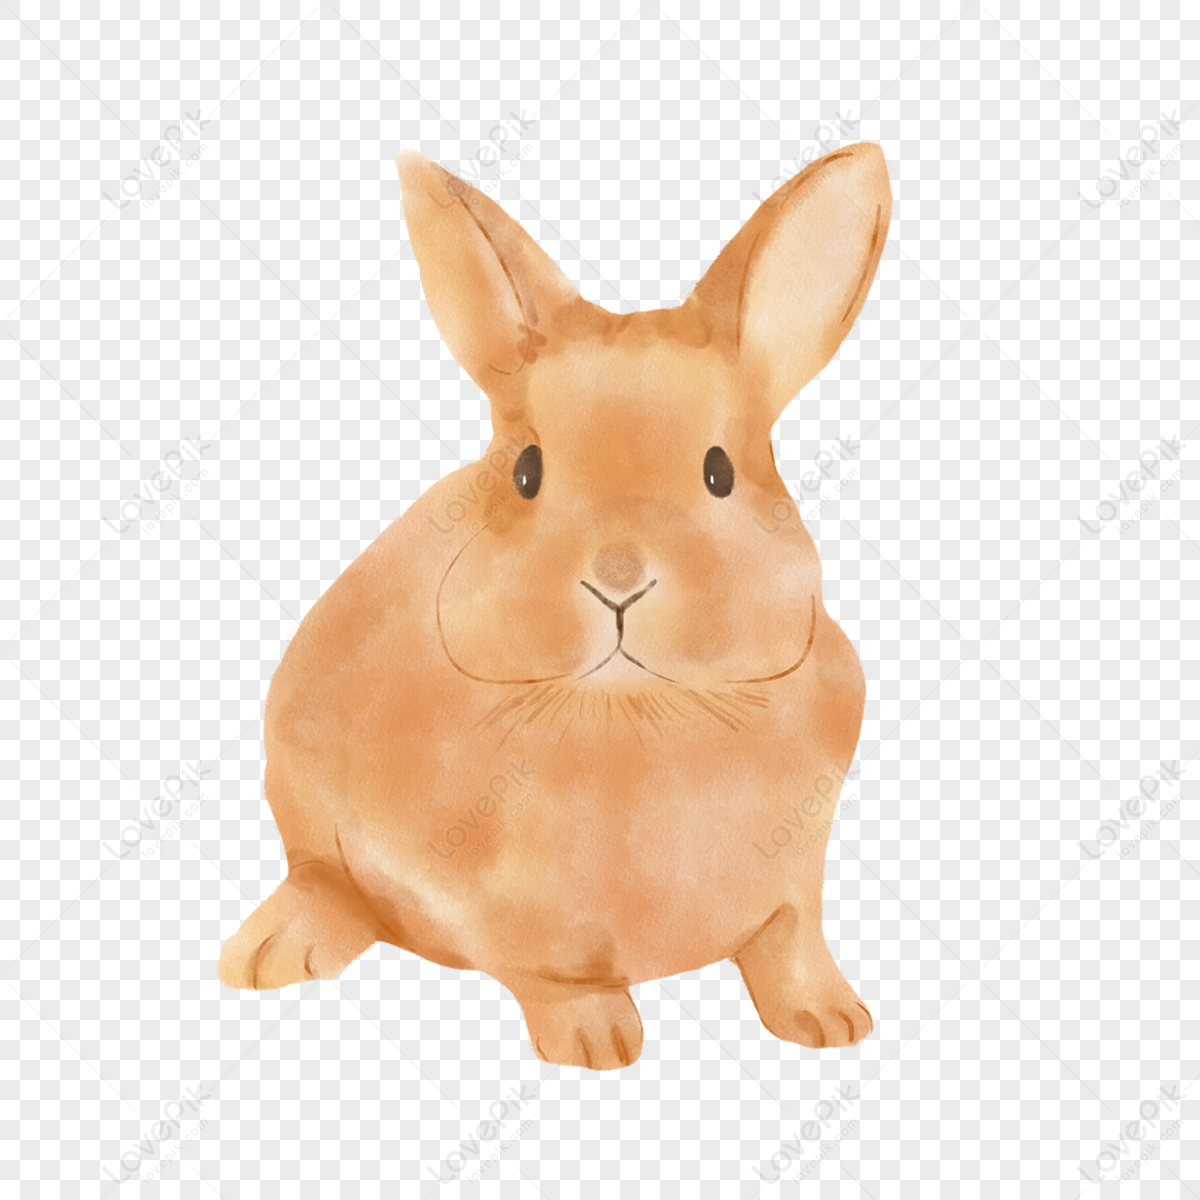 Watercolor vacuctous animal rabbit,bloom,cute,anime png hd transparent image